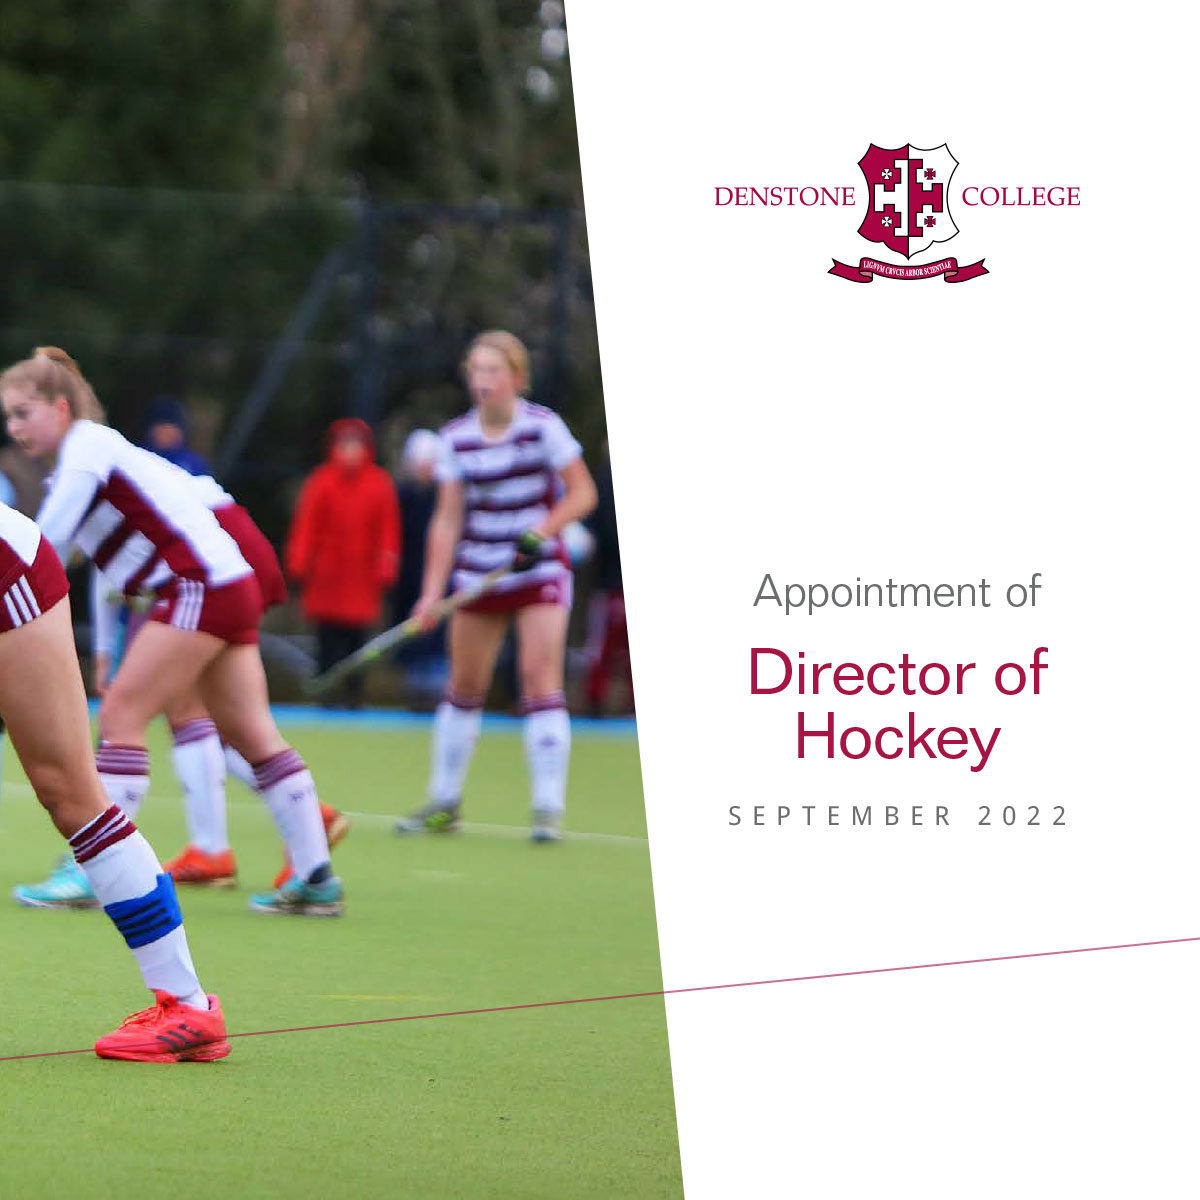 We are delighted to be working alongside Denstone College to appoint a Director of Hockey. The school seeks an inspiring, enthusiastic person with a background in the game, ideally as player and coach. Full details at jobsinsport.online/job/146/direct… #jobsinsport #hockey #schoolsport